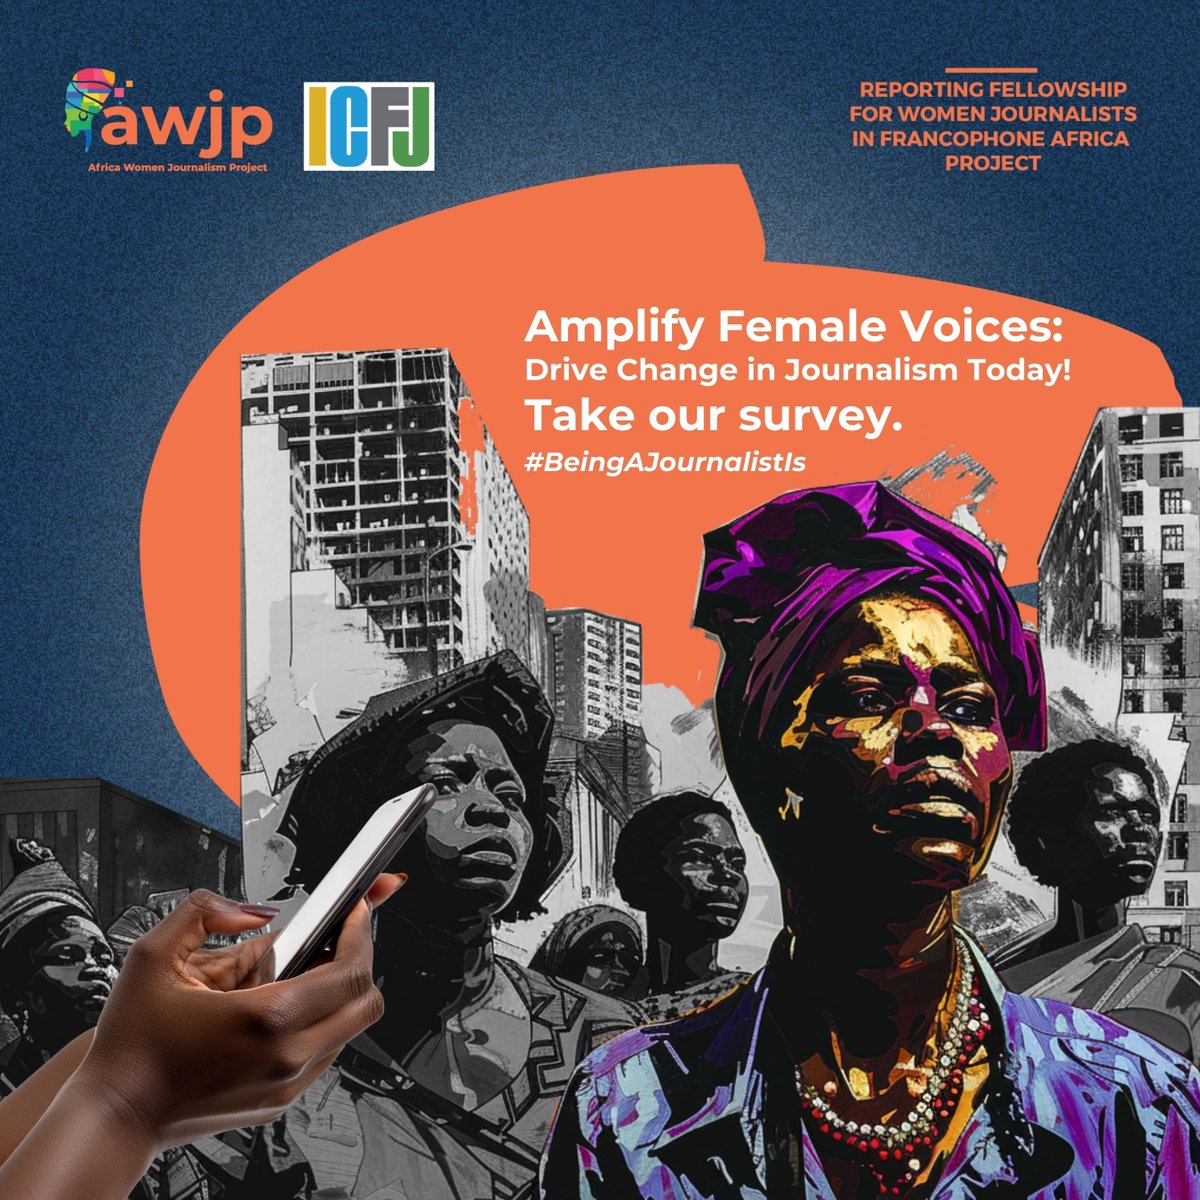 Female voices in journalism drive change. Join us in shaping the future by taking our survey here bit.ly/43TA7Yn #BeingAJournalistIs #MediaSurvey